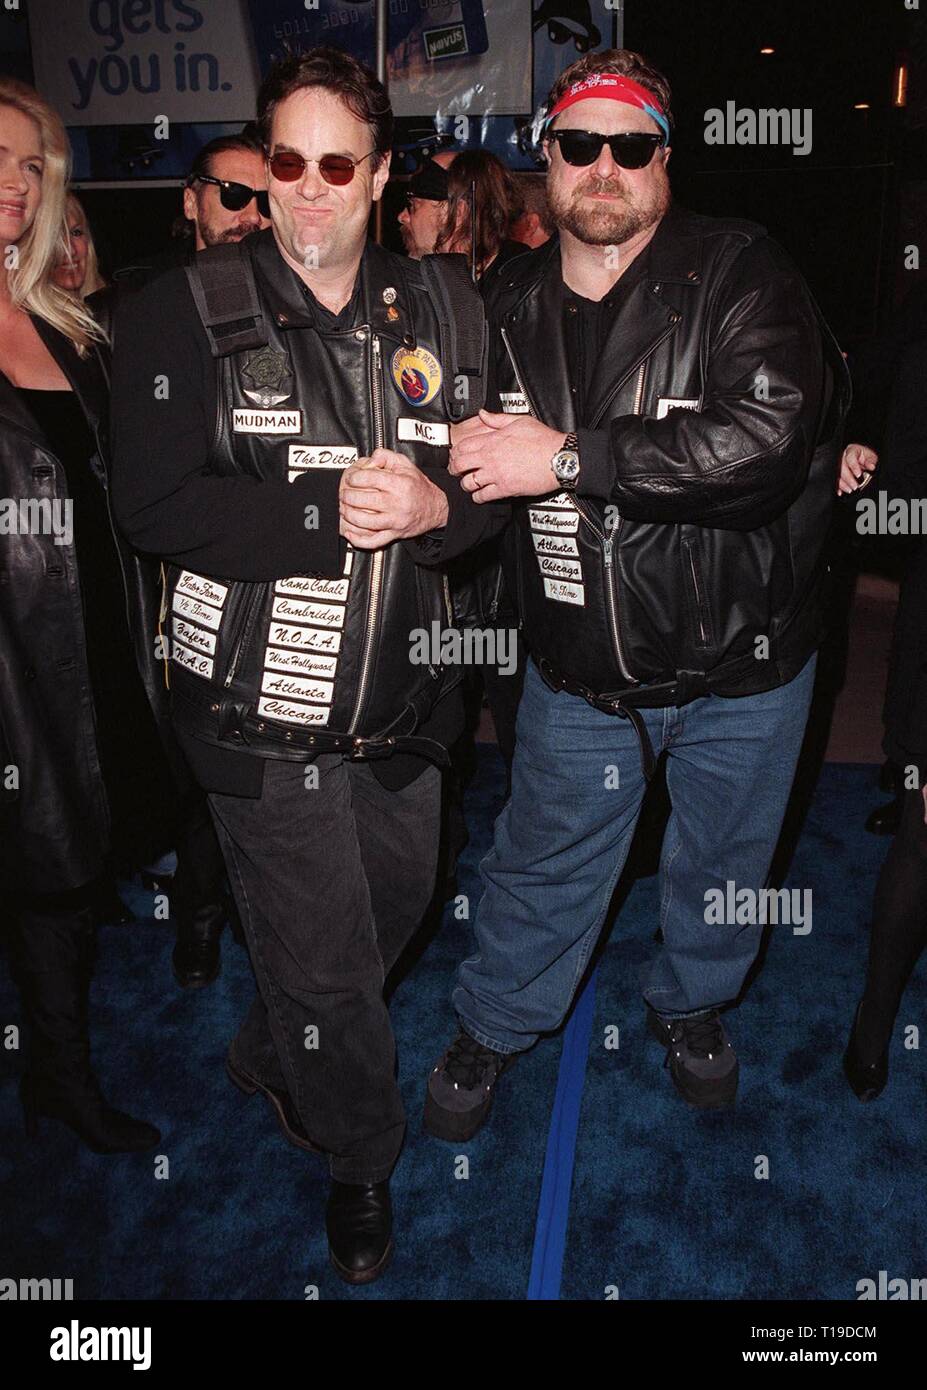 LOS ANGELES, CA - January 31, 1998: Actors DAN AYKROYD (left) & JOHN GOODMAN at the premiere of their new movie 'Blues Brothers 2000,' at Universal Amphitheatre, Hollywood. Stock Photo